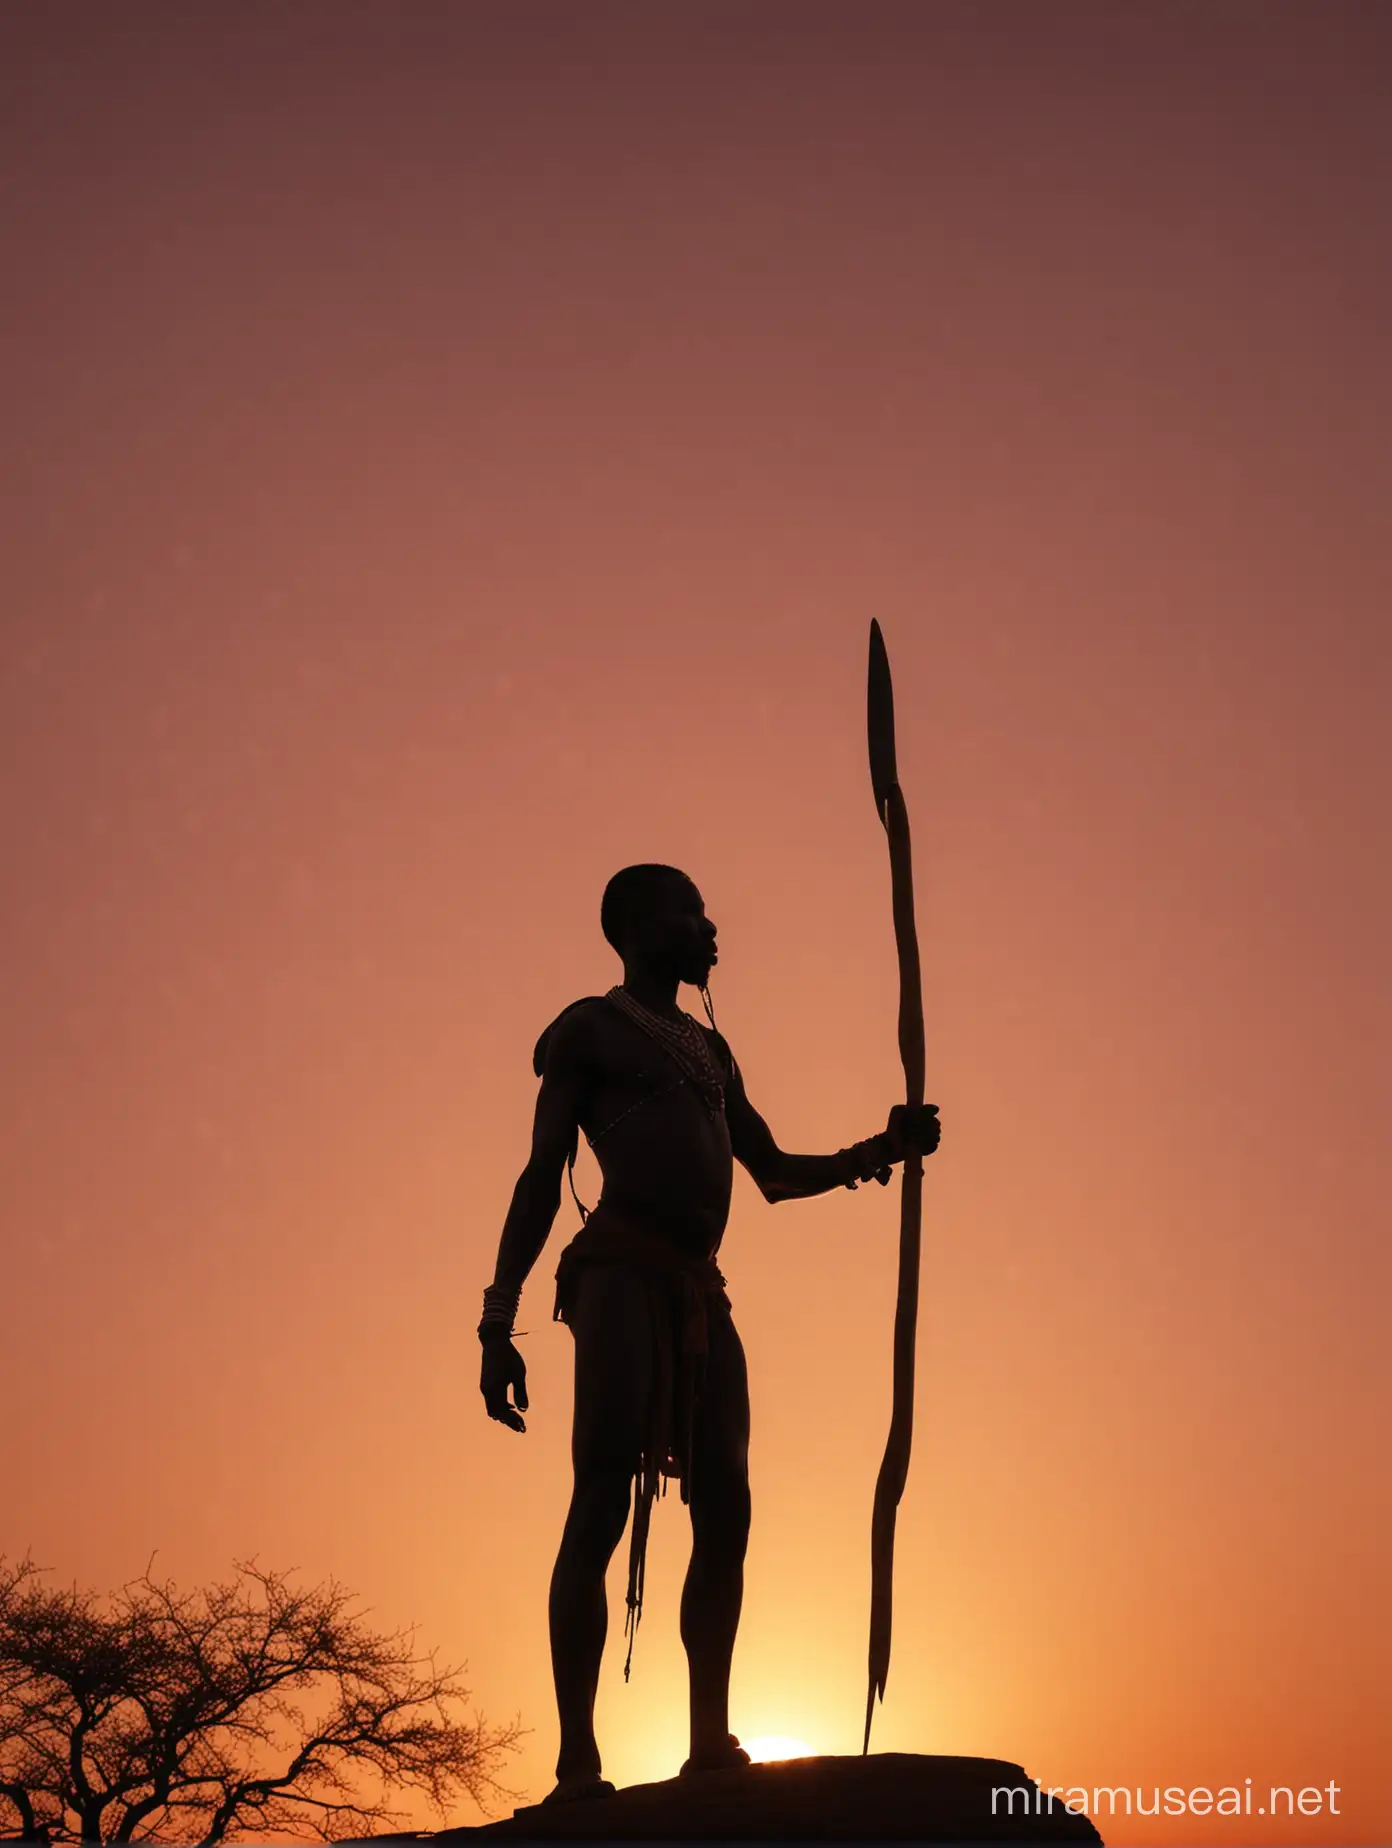 Silhouette of Dinka Warrior with Spear on African Sunset Horizon